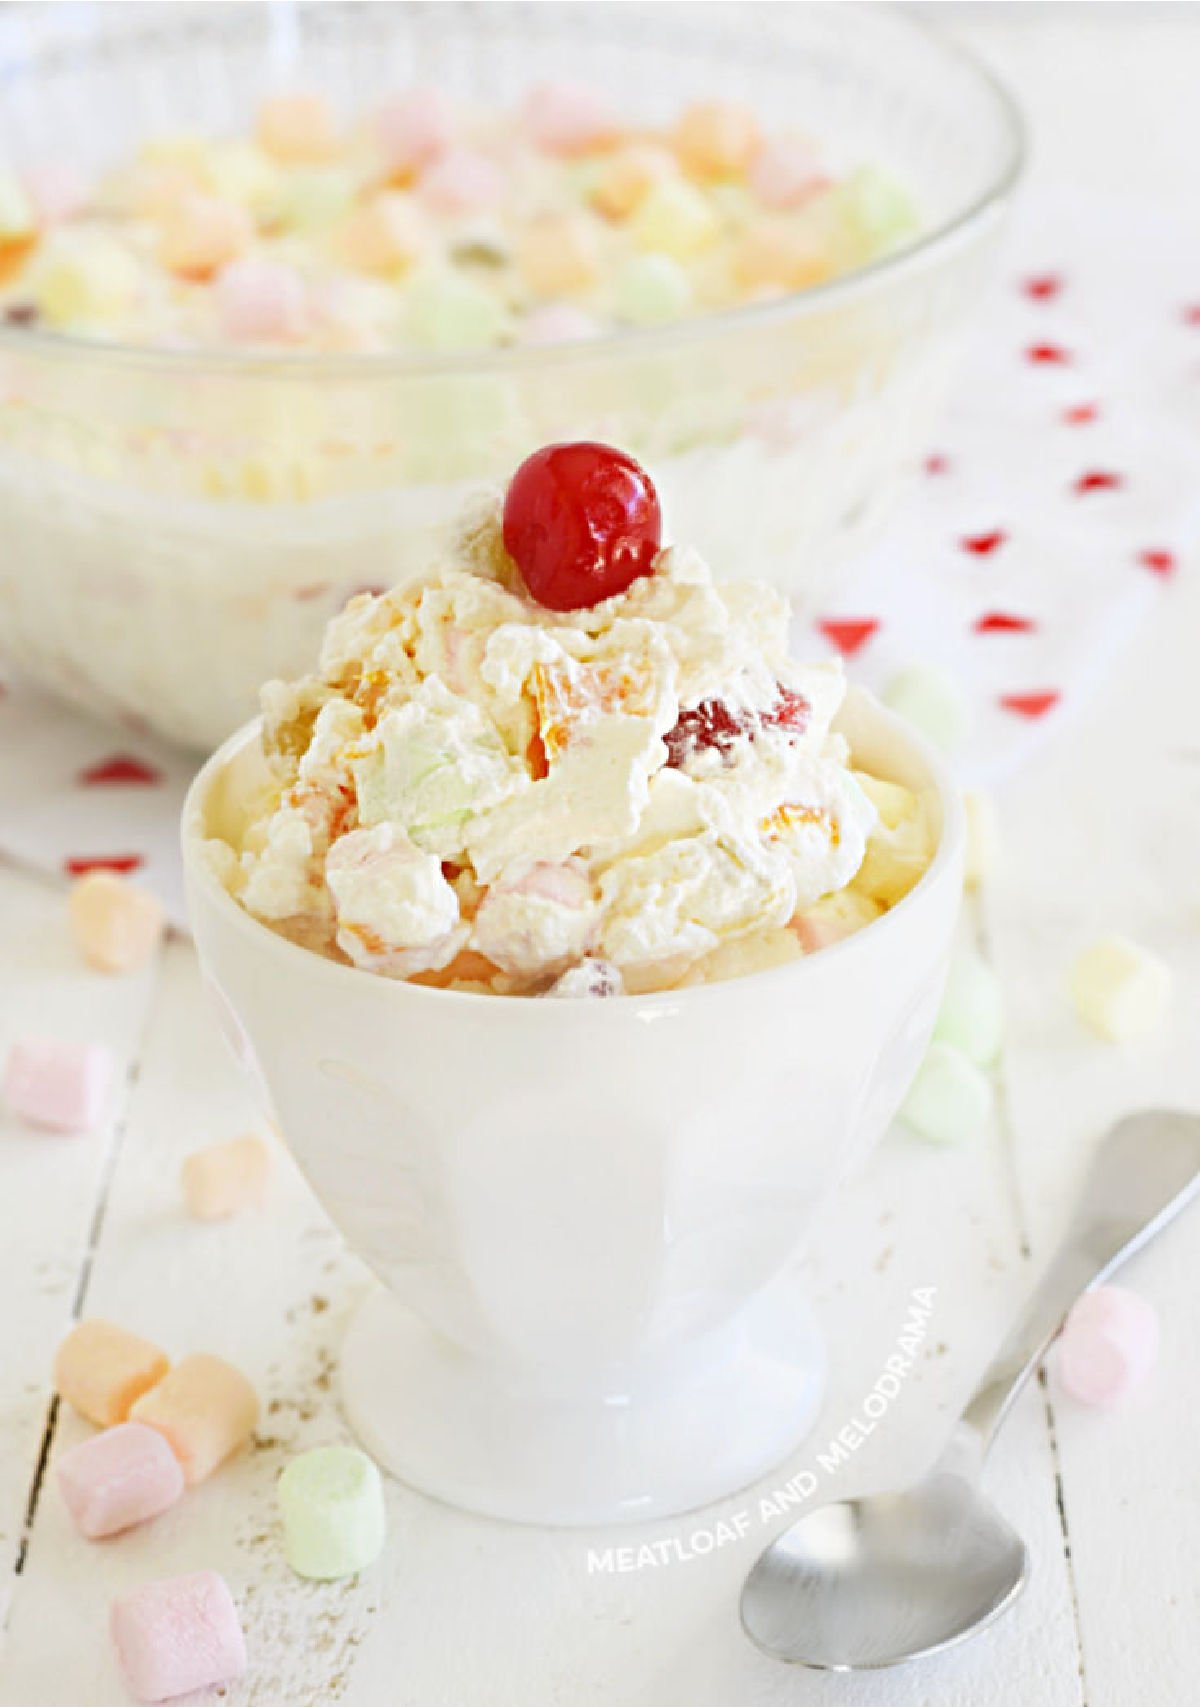 fruit salad recipe with cool whip and cherry in white dish on the table